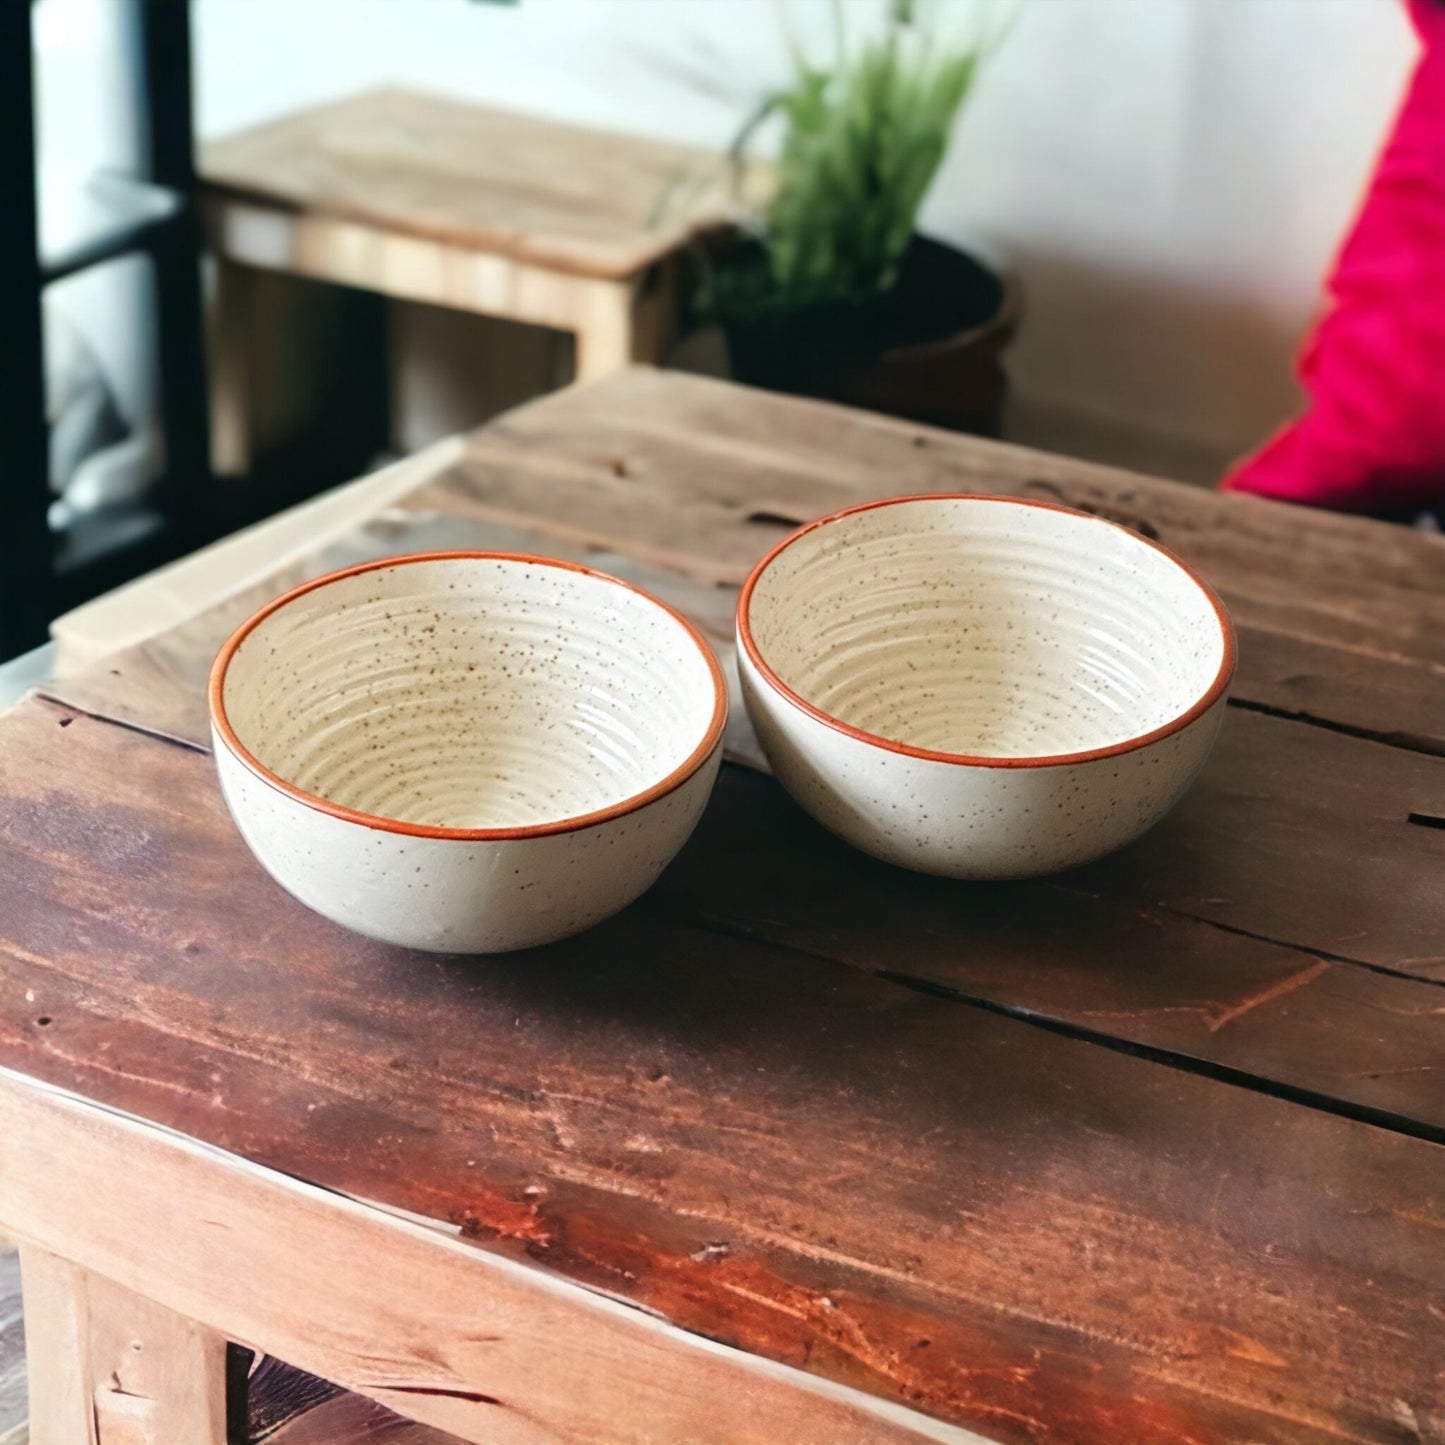 Arcadia snack bowls - set of two